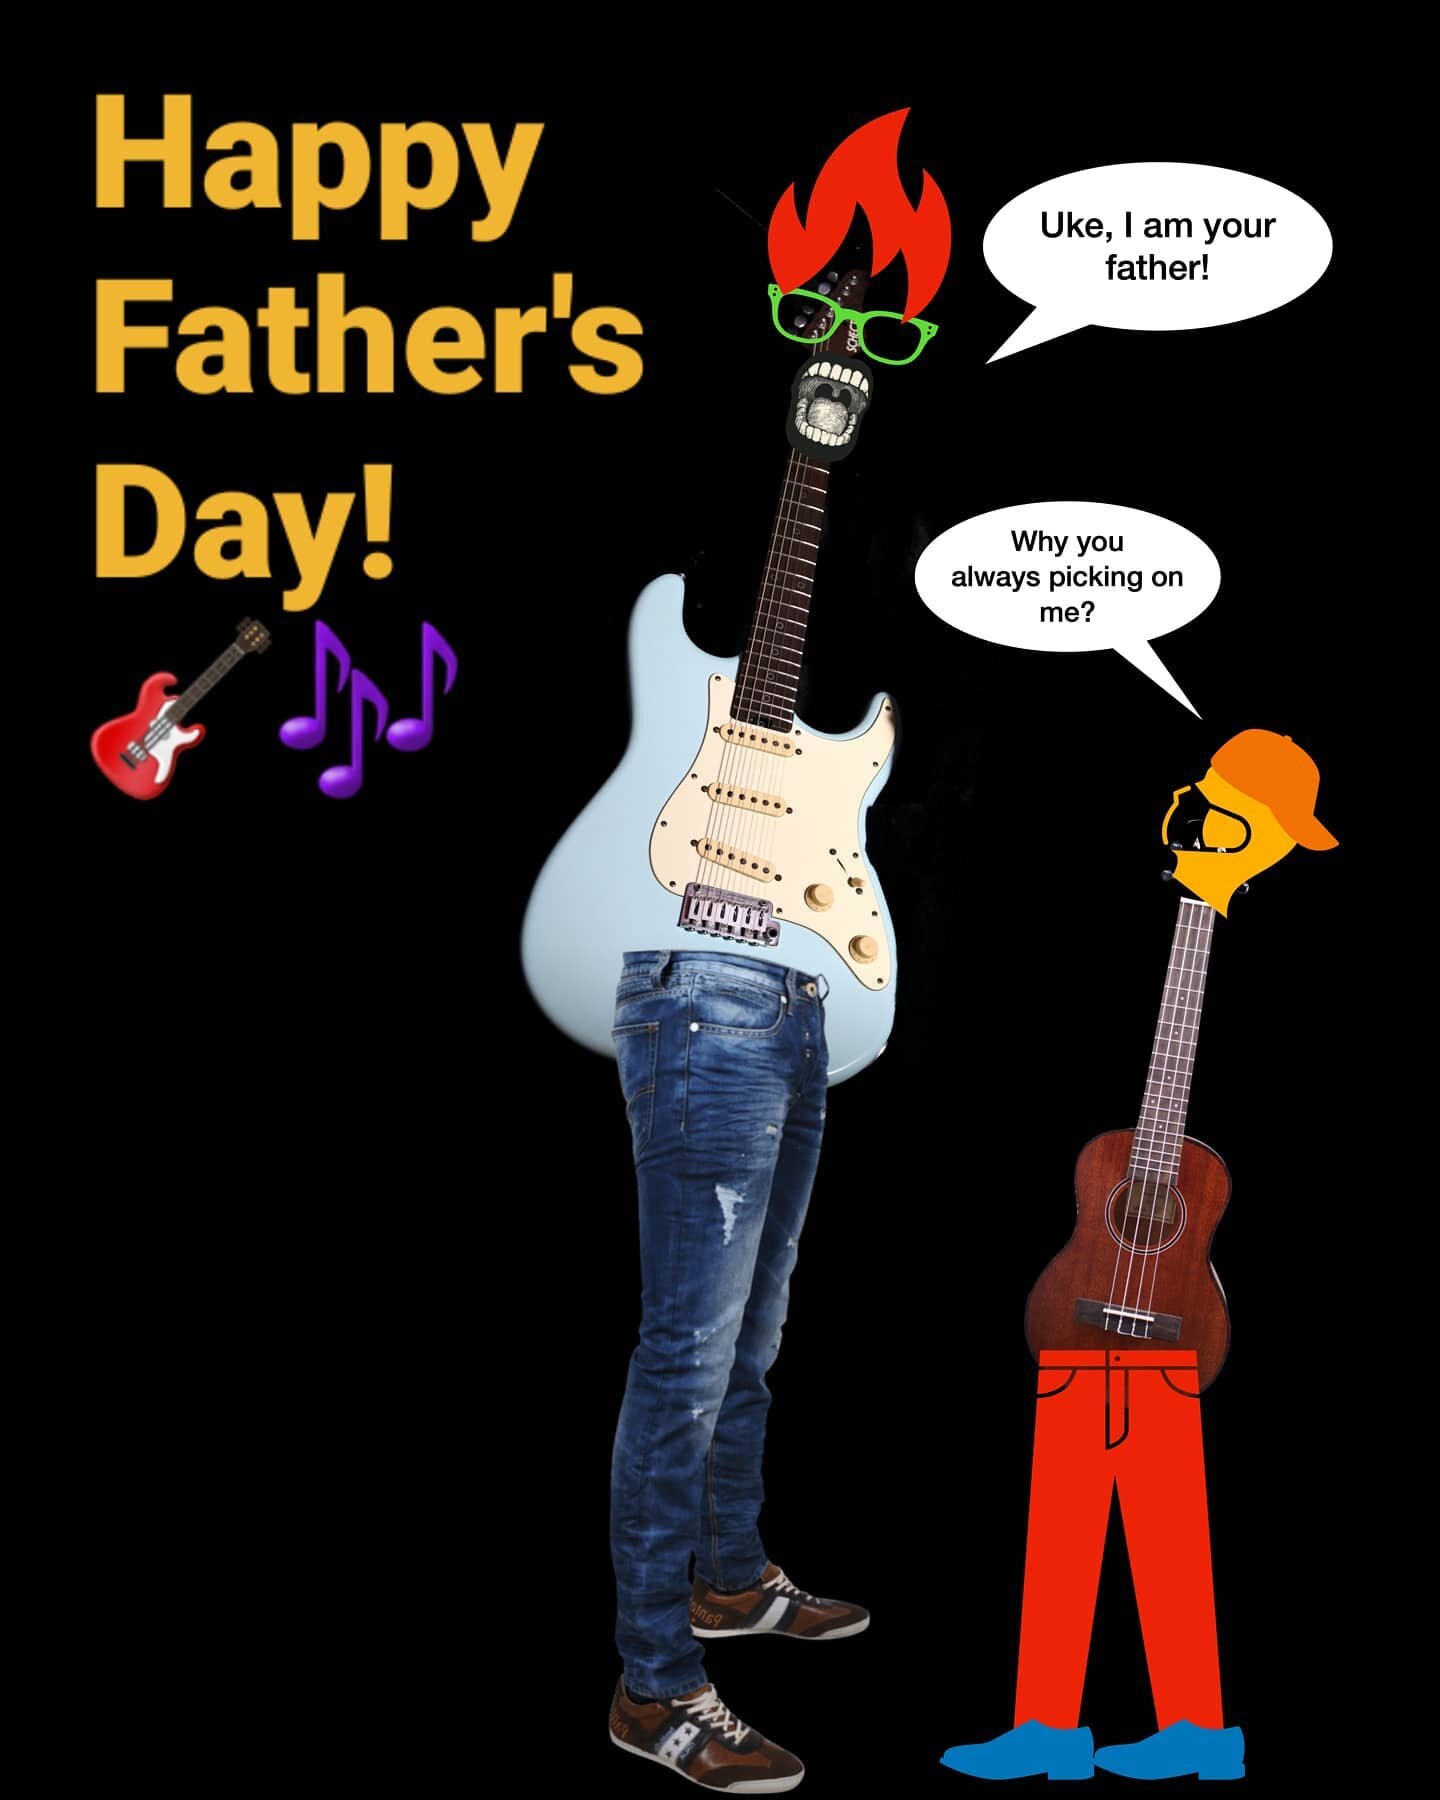 Happy Father's Day to all the dads around the world! Being a dad is one of the highlights of my life 😎 I hope it's a blessed day for you all 💪🥳🎸🎶🎶

#happyfathersday #guitarists #guitar #GuitarLessonsInMiami #father #electricguitar #ukulele #lov